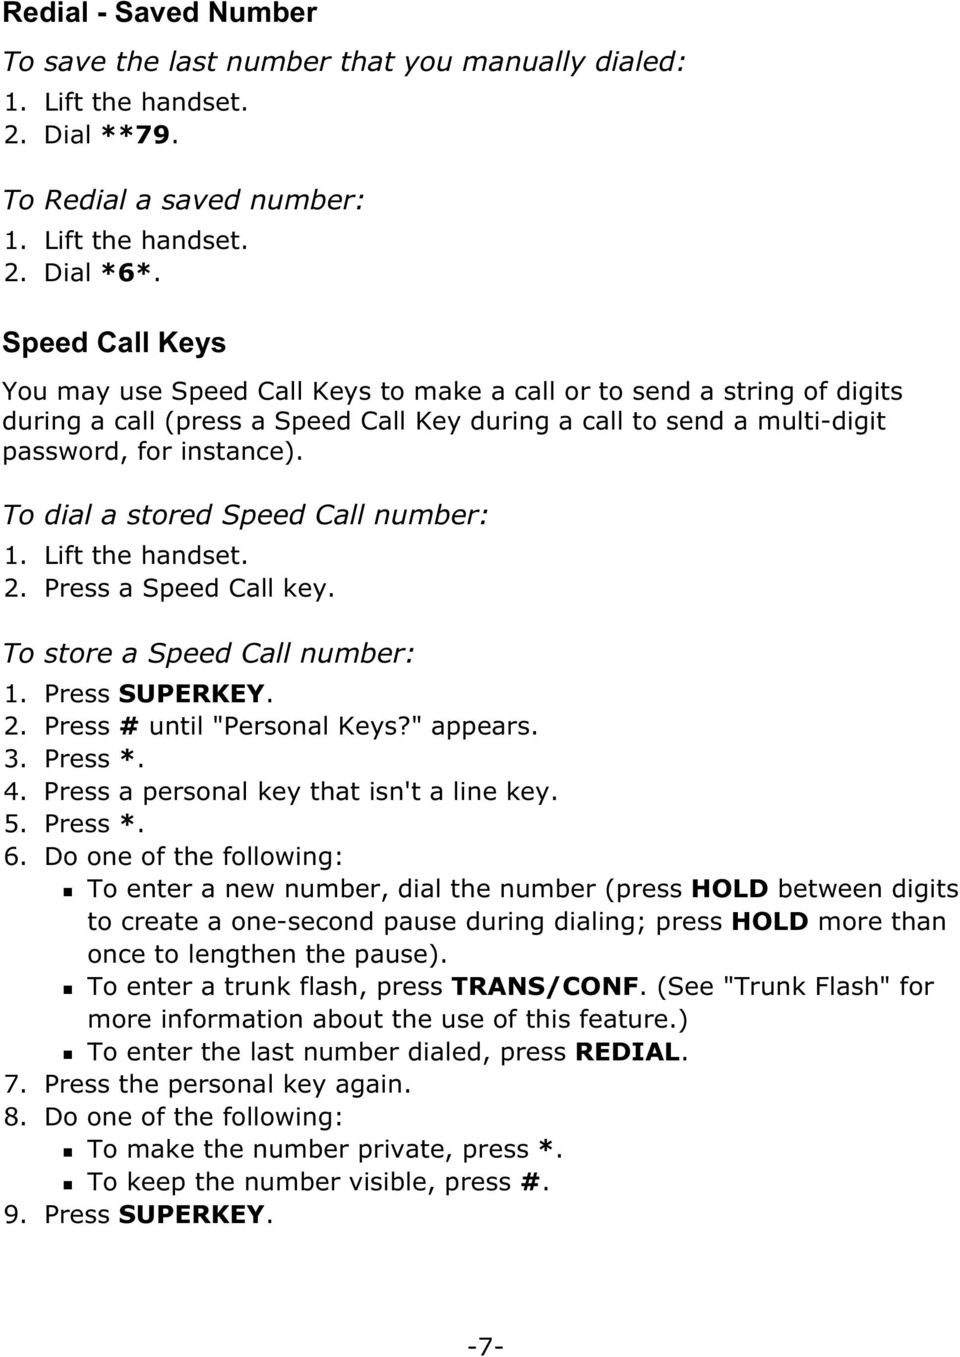 To dial a stored Speed Call number: 2. Press a Speed Call key. To store a Speed Call number: 1. Press SUPERKEY. 2. Press # until "Personal Keys?" appears. 3. Press *. 4.